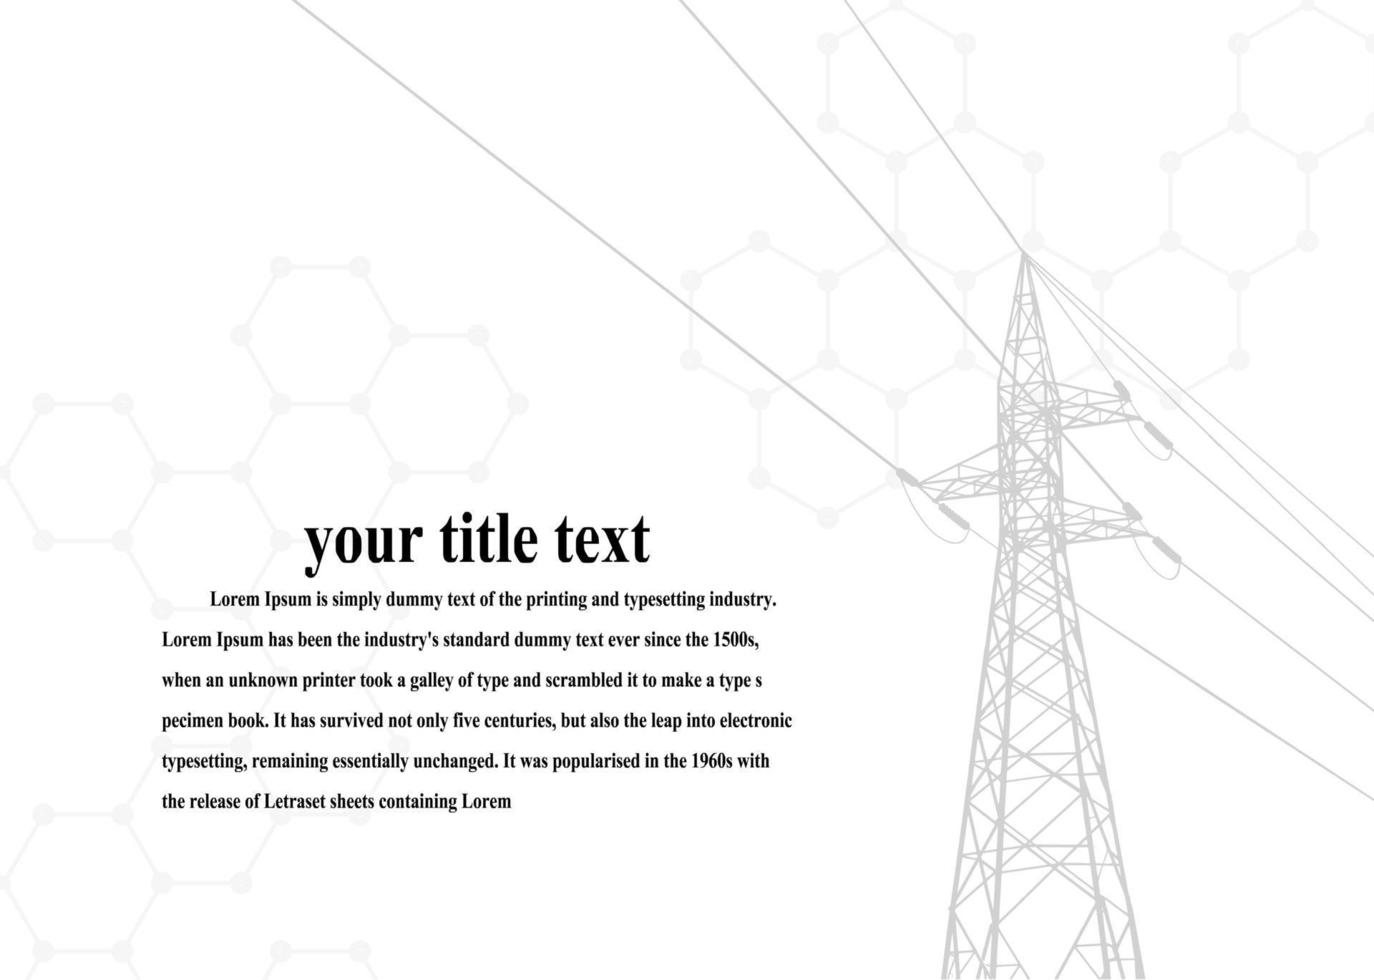 Electric pole .High Voltage transmission systems. A network of interconnected electricalHigh Voltage  Towers Electric Power Transmission. Lines Supplies Electricity to the Text.  Pylon, pole network. vector